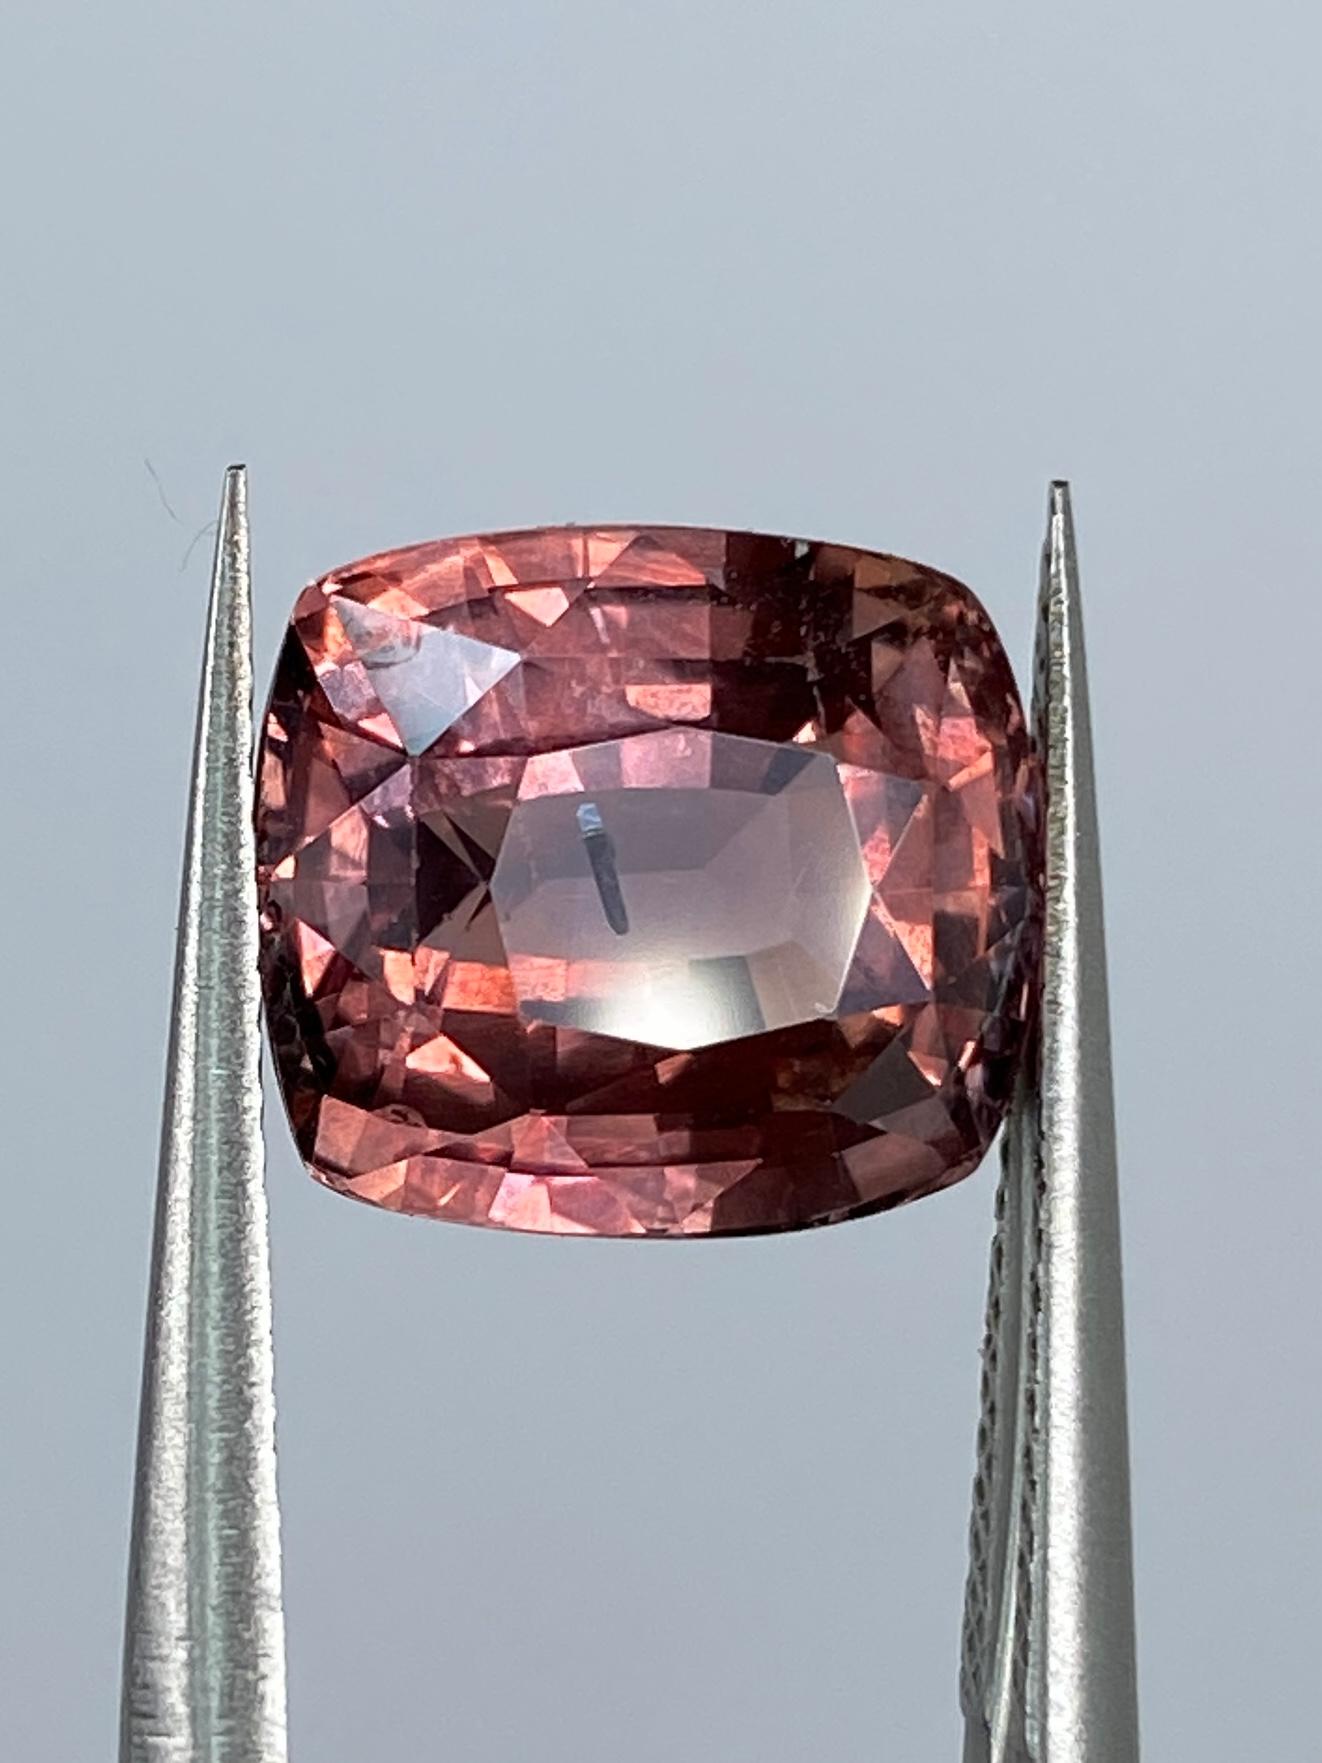 The Sapphire Merchant is proud to present this sensational Padparadscha Sapphire. At a remarkable 6.33 carats, this cushion-shaped beauty boasts a Modified Brilliant Cut, ensuring every facet dances with light and exudes unparalleled brilliance.